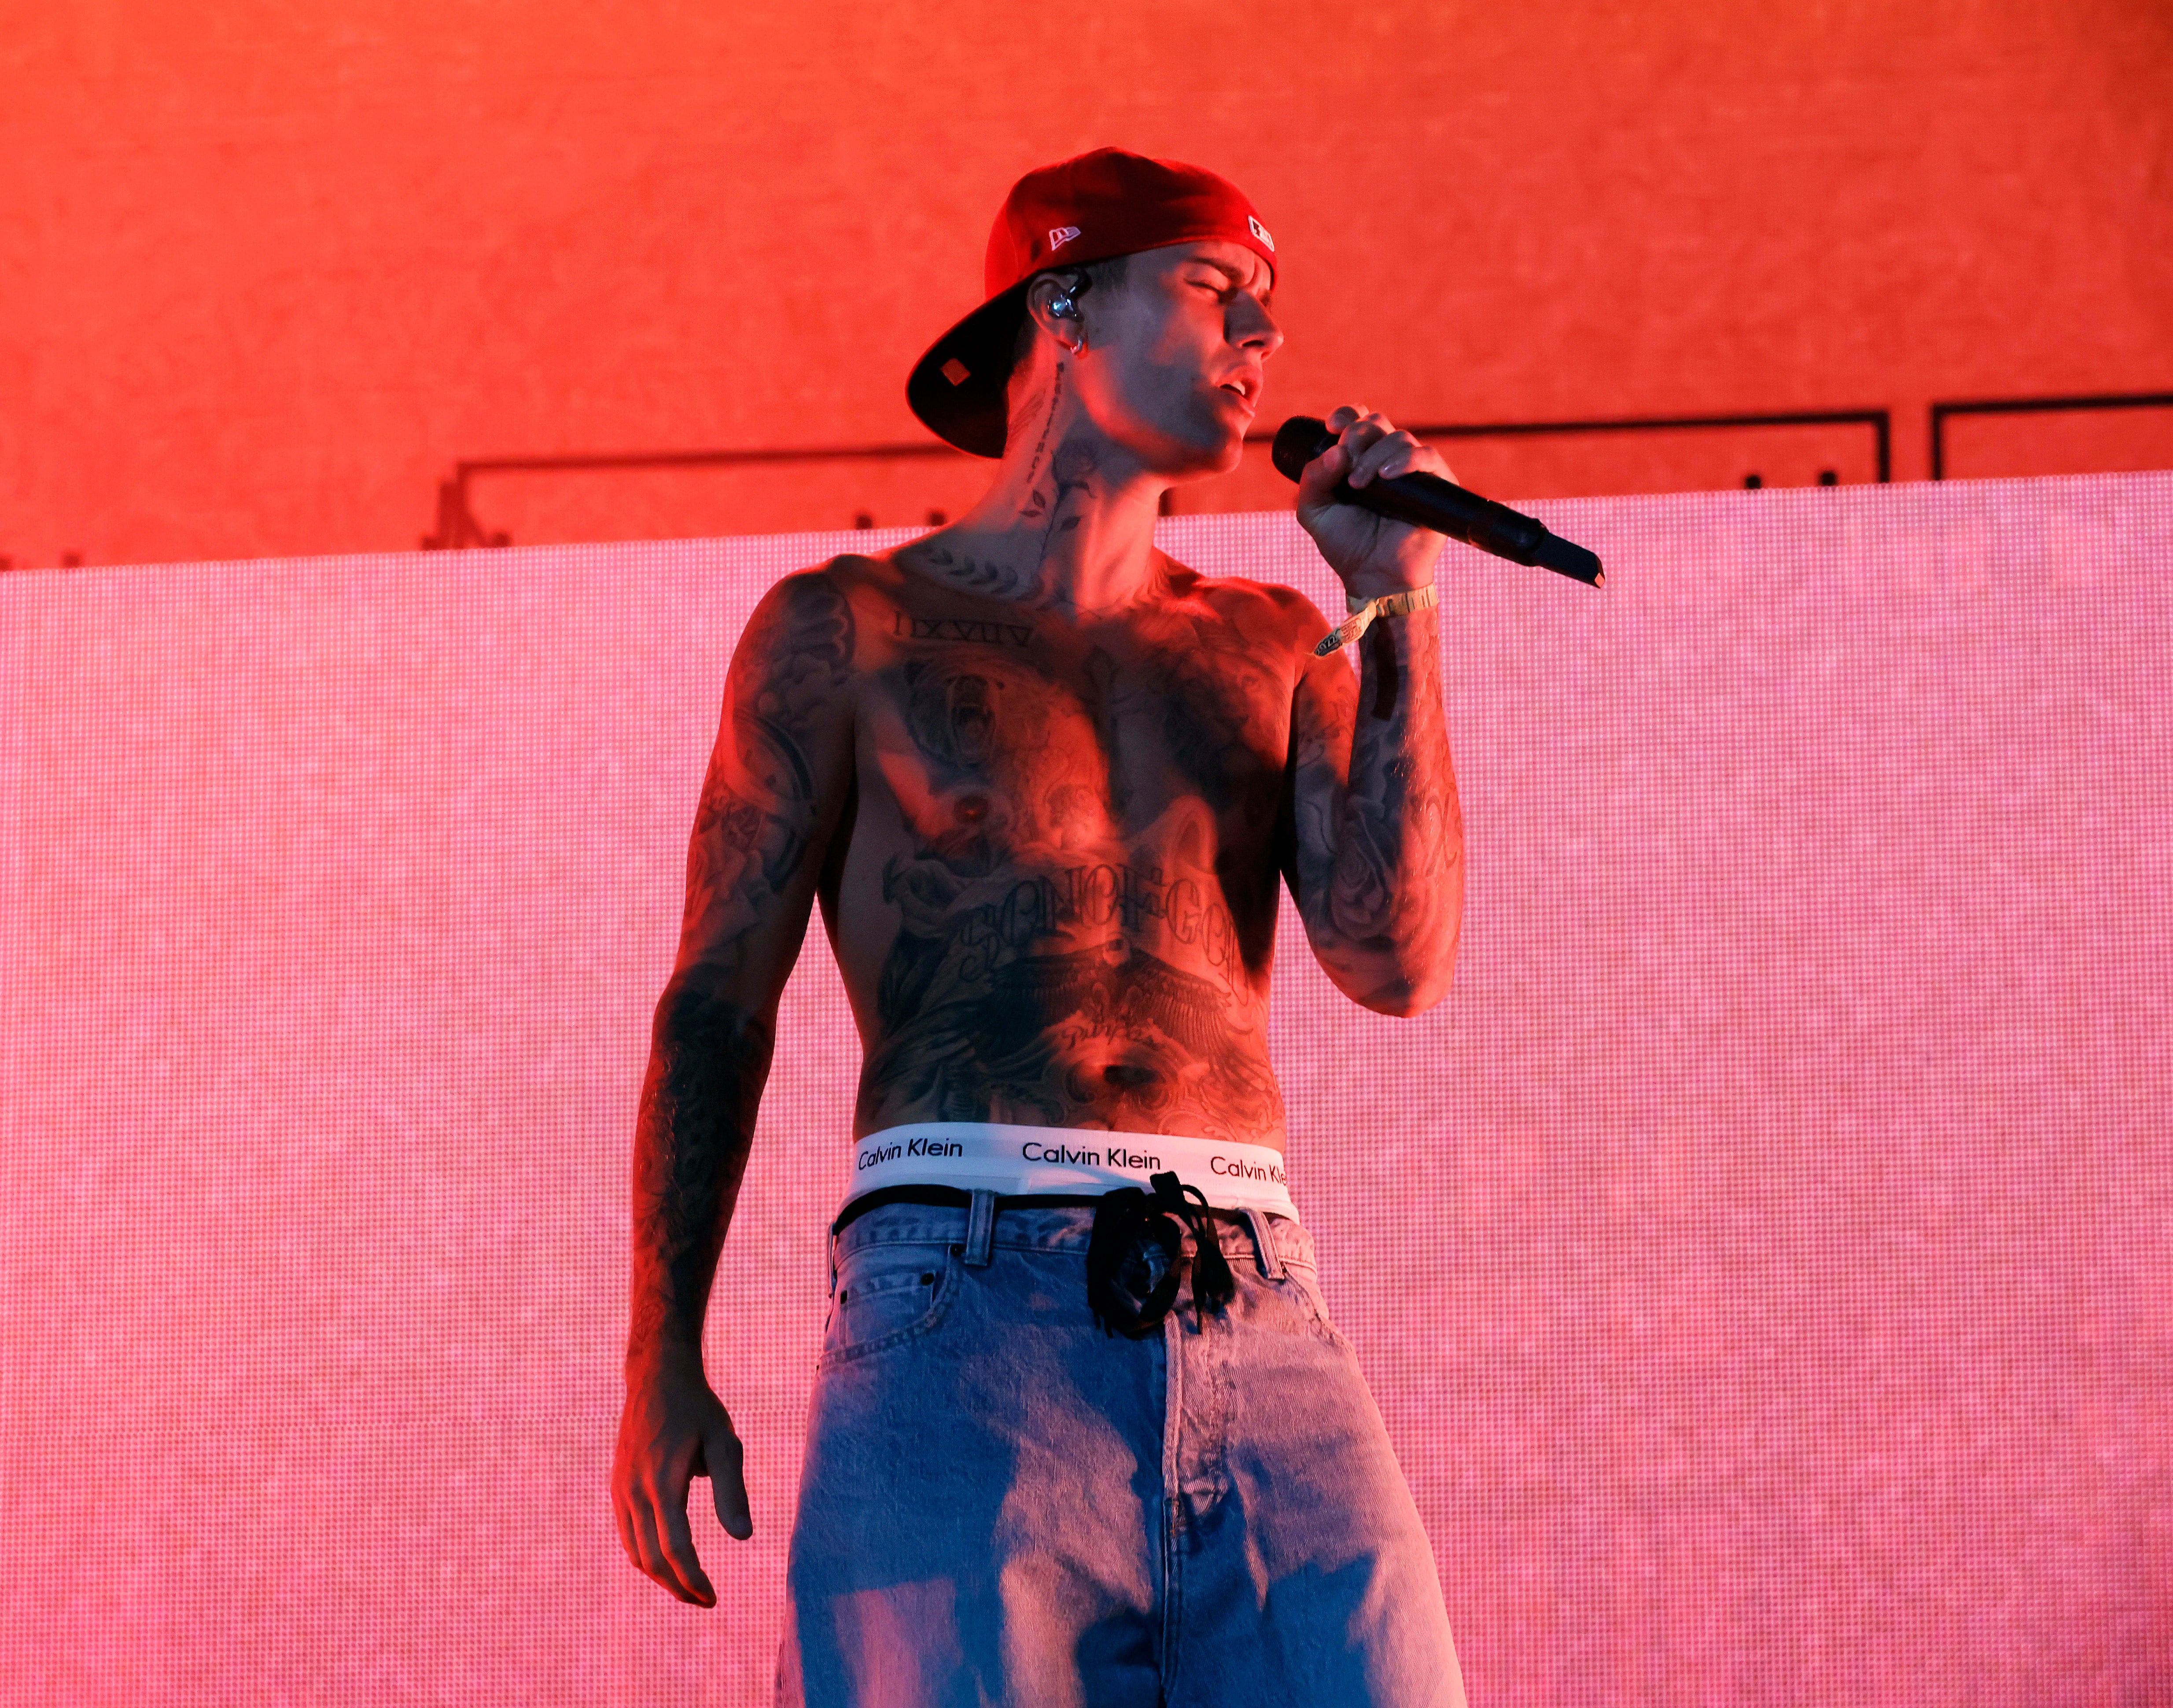 Bieber made a surprise appearance at Coachella